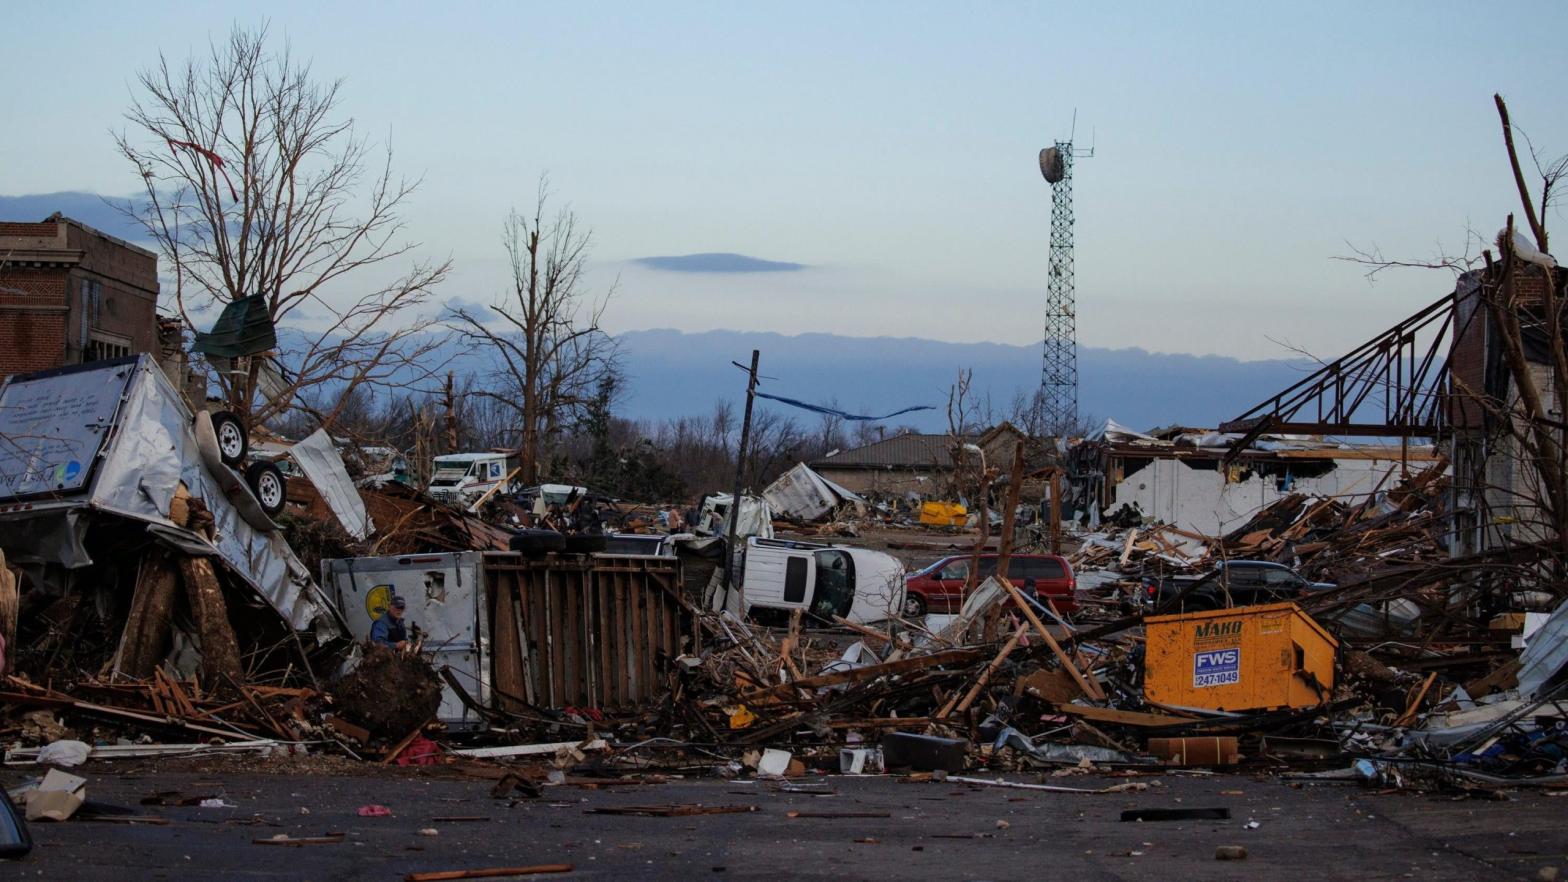 Heavy damage is seen downtown after a tornado swept through the area on December 11, 2021 in Mayfield, Kentucky. (Photo: Brett Carlsen, Getty Images)